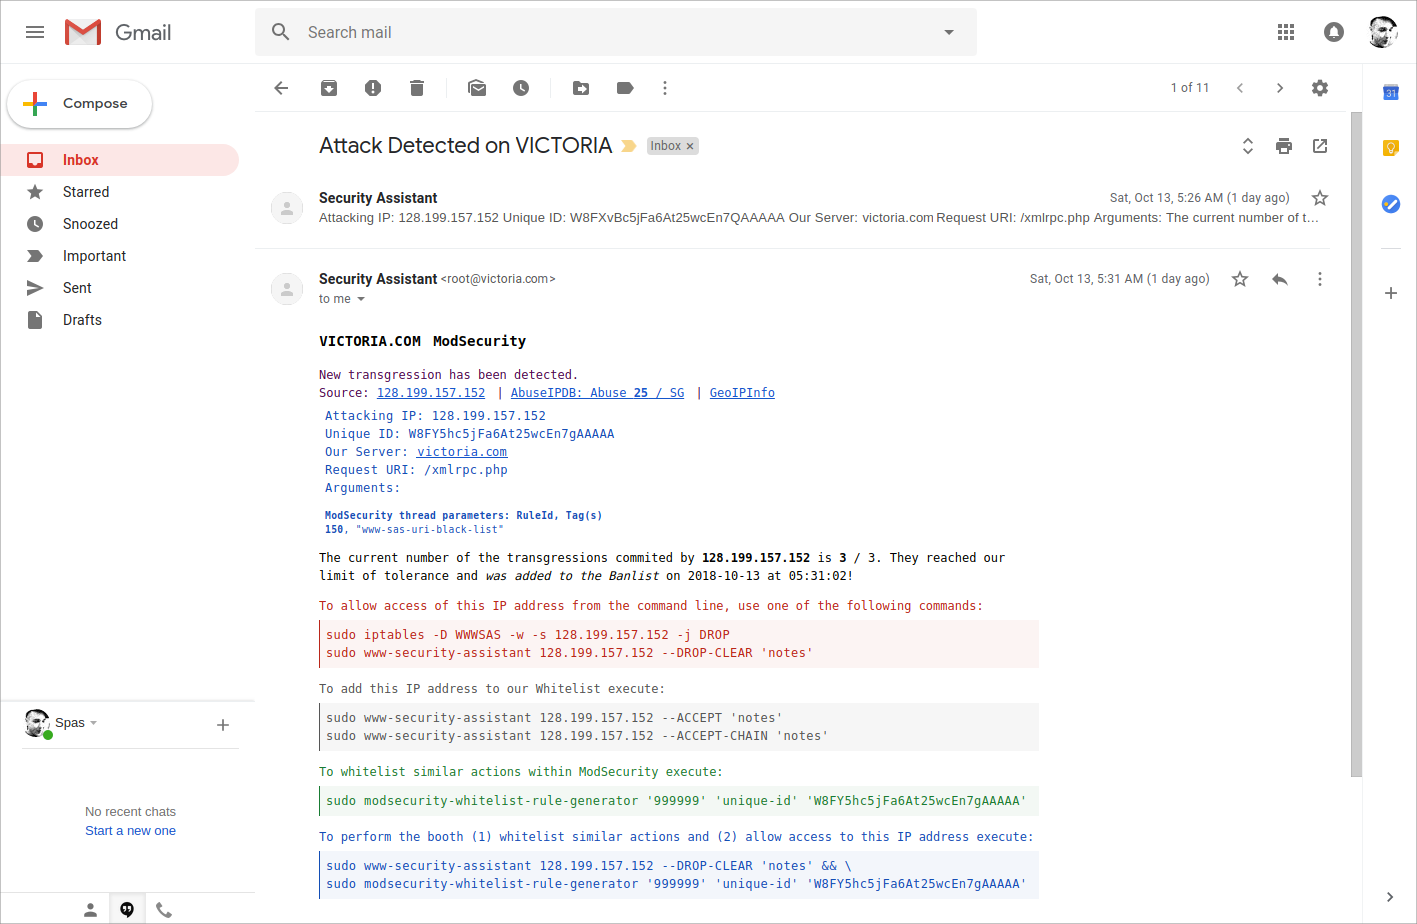 Examples email sent by the script.